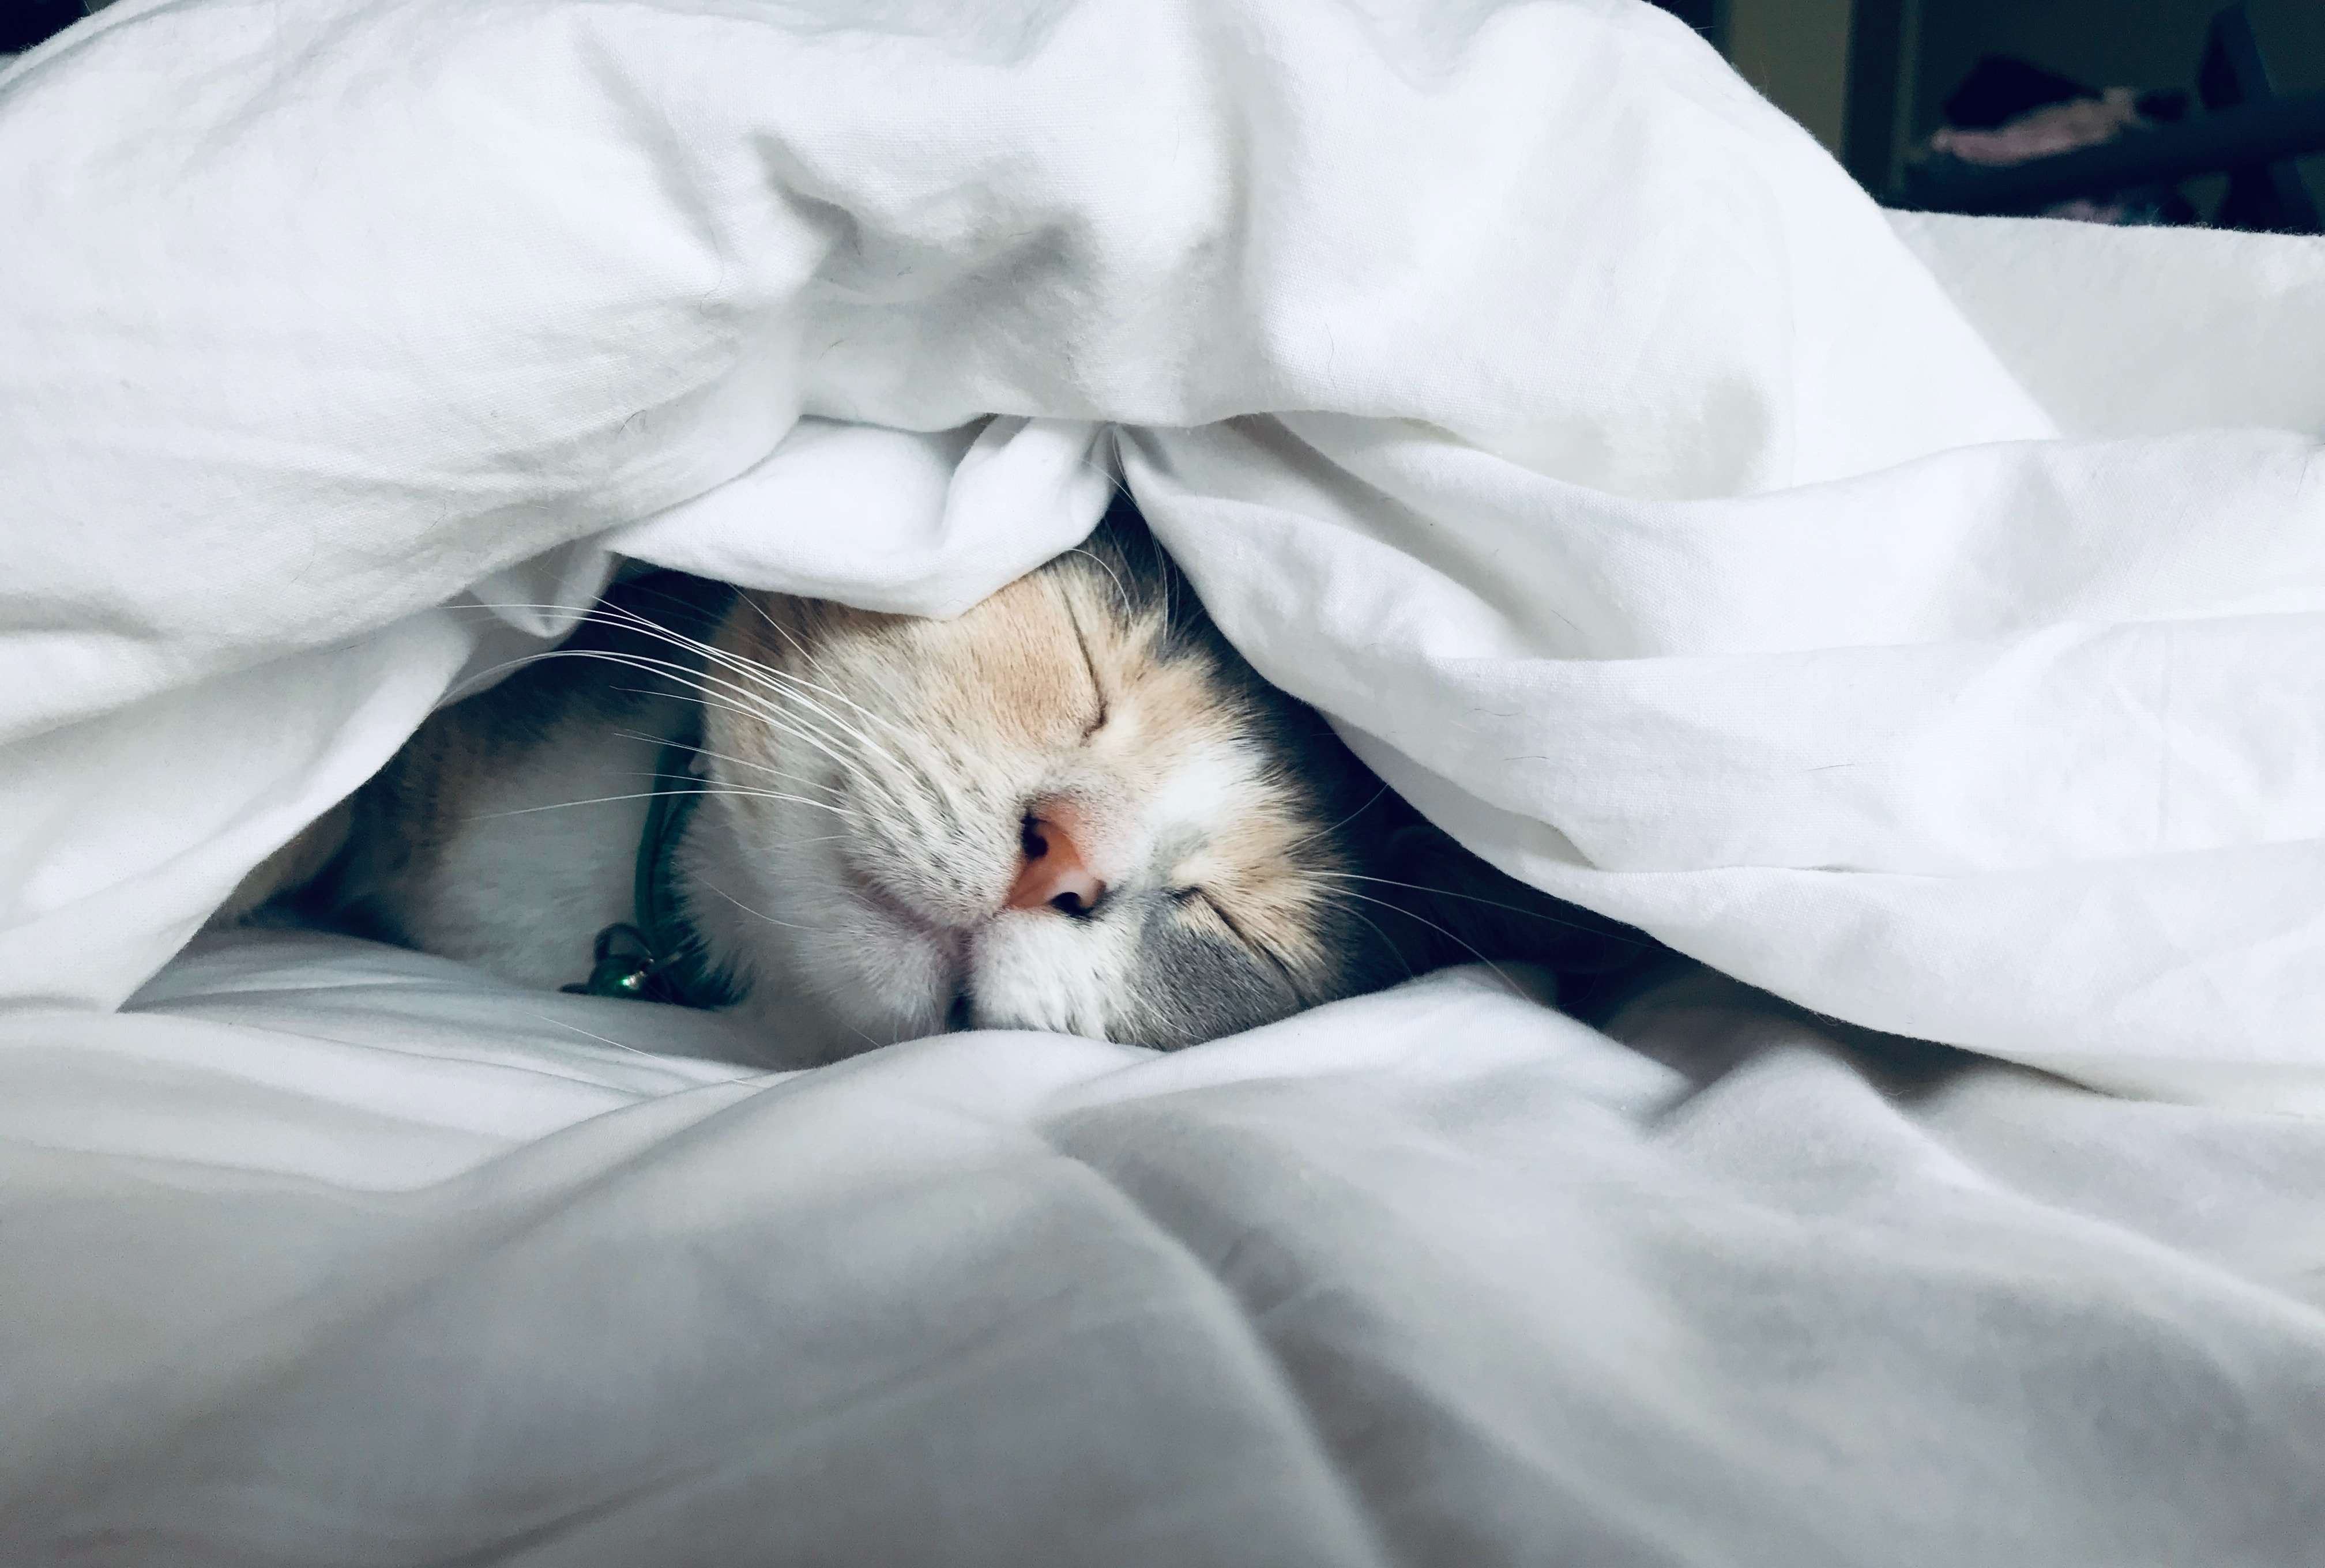 Photo by Kate Stone Matheson on Unsplash - a cat sleeping under a white quilt